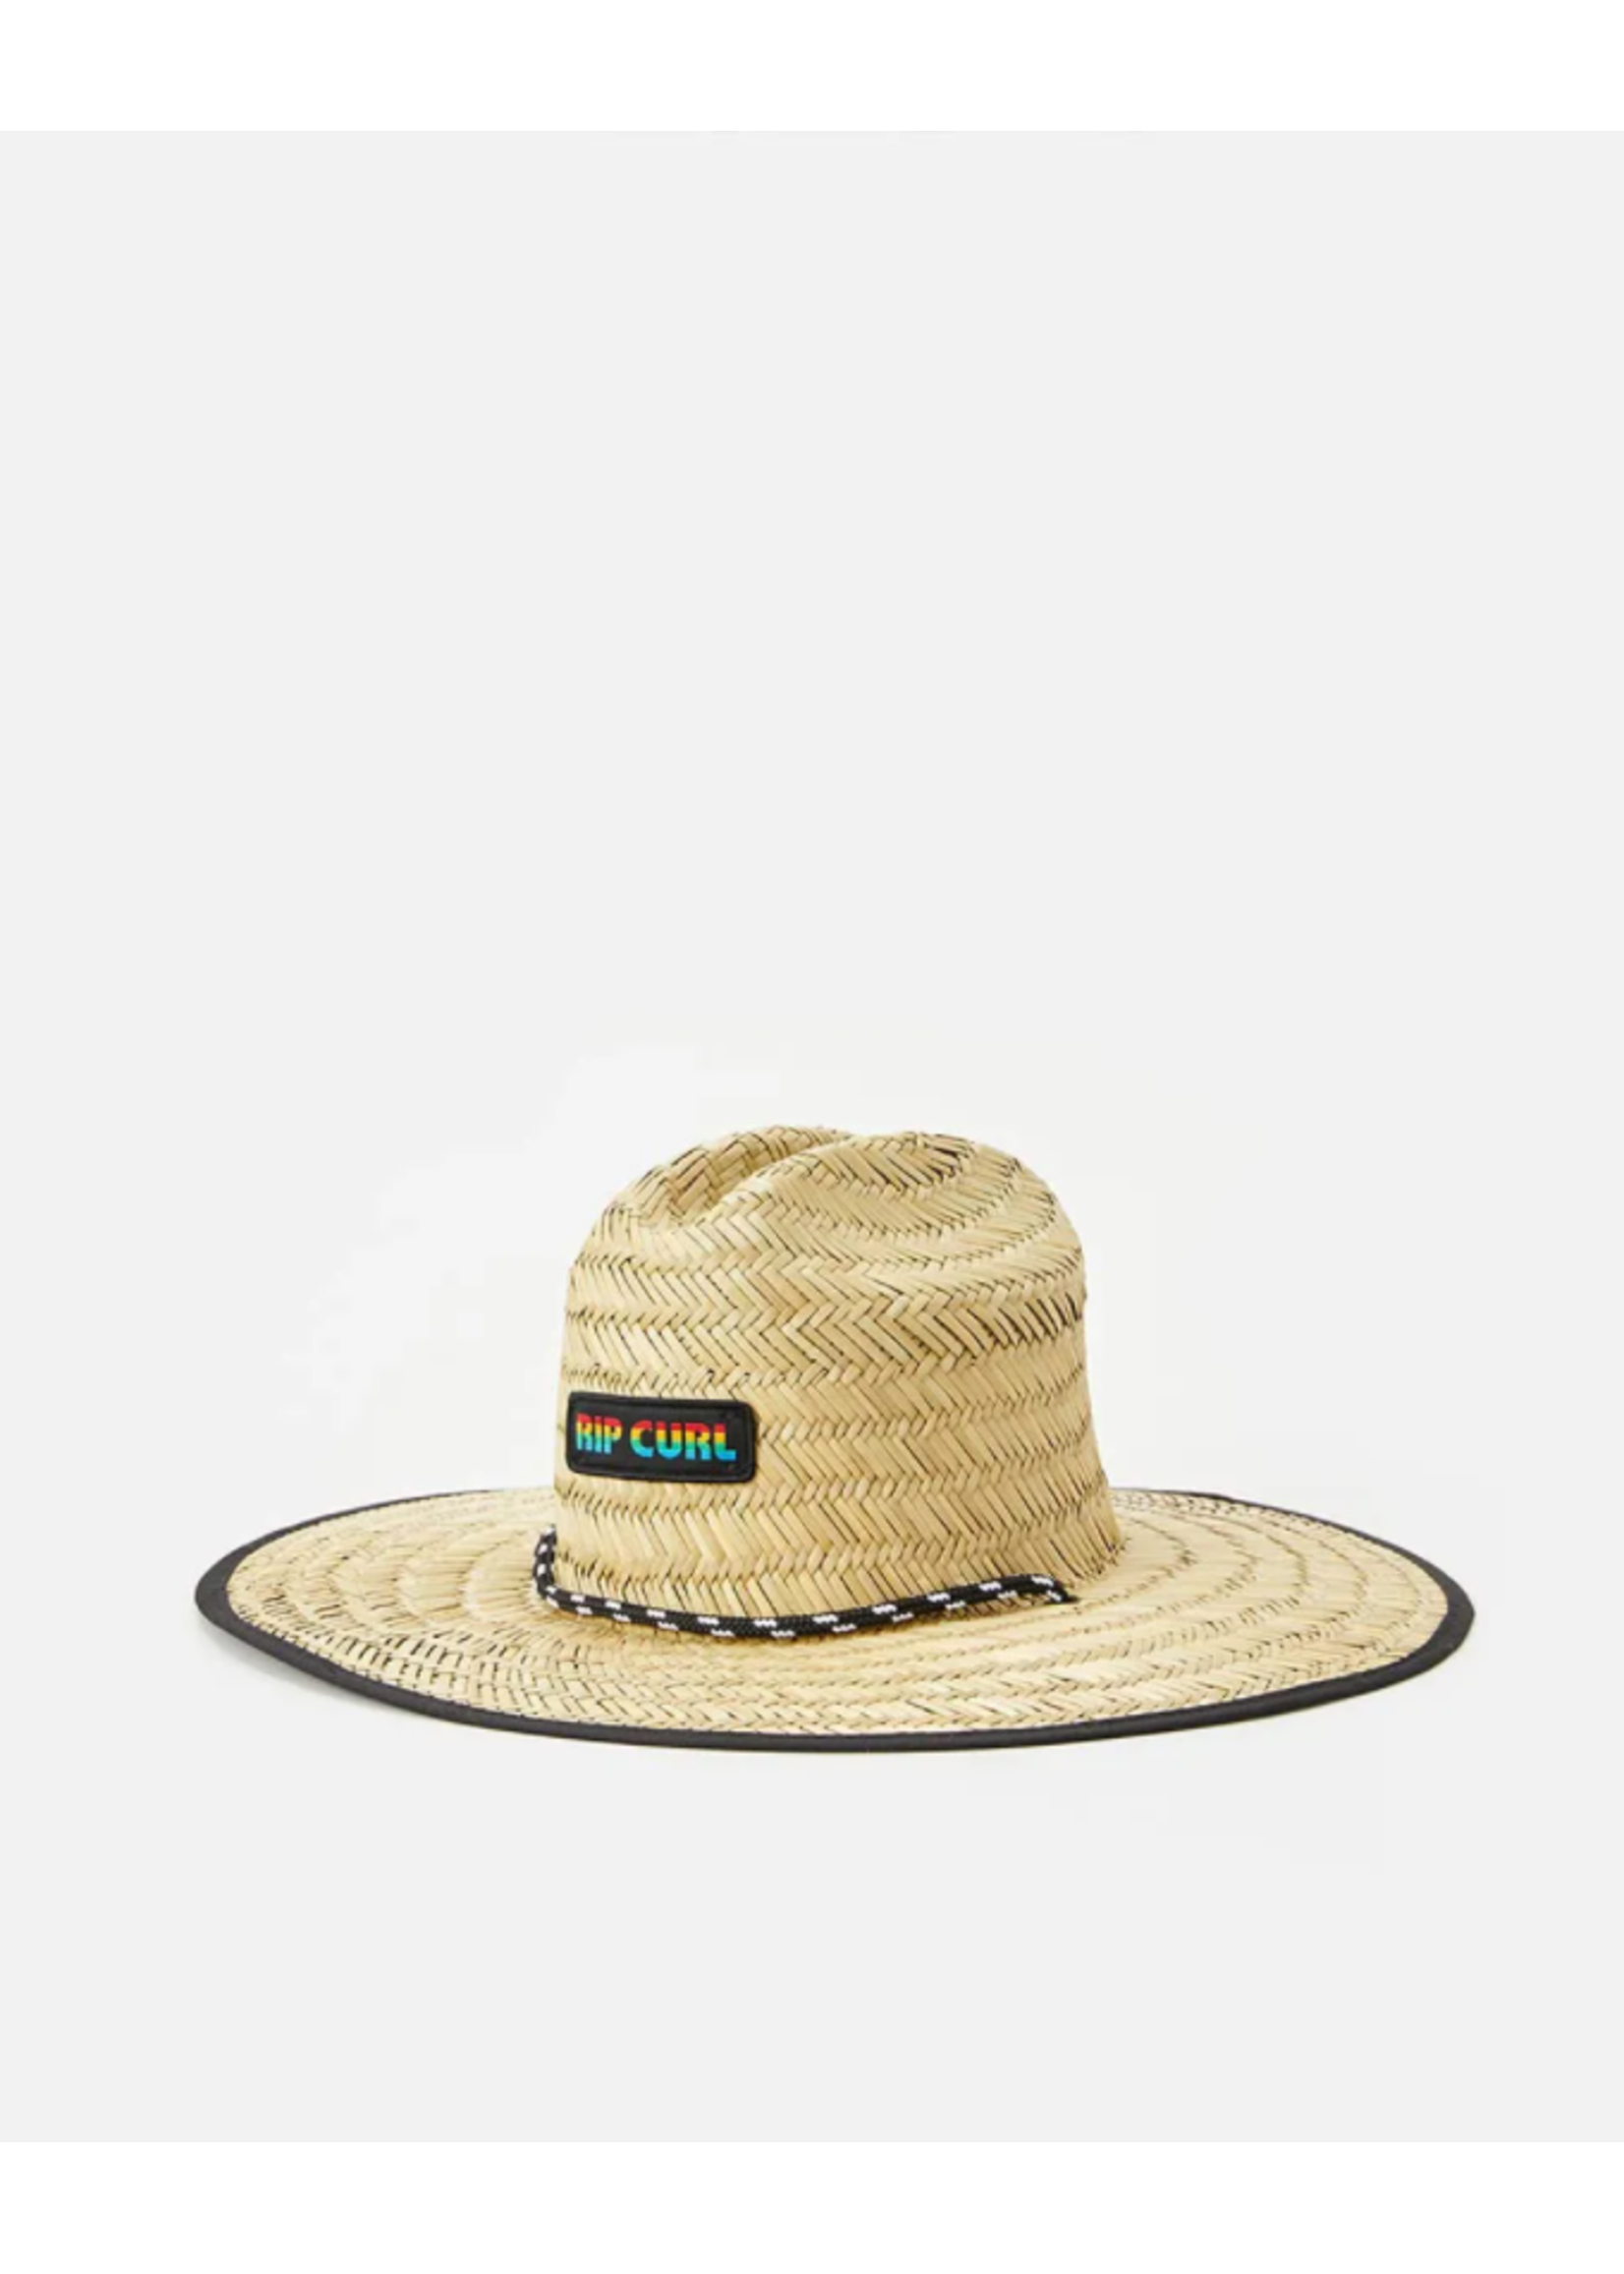 Rip Curl ICONS STRAW HAT S22